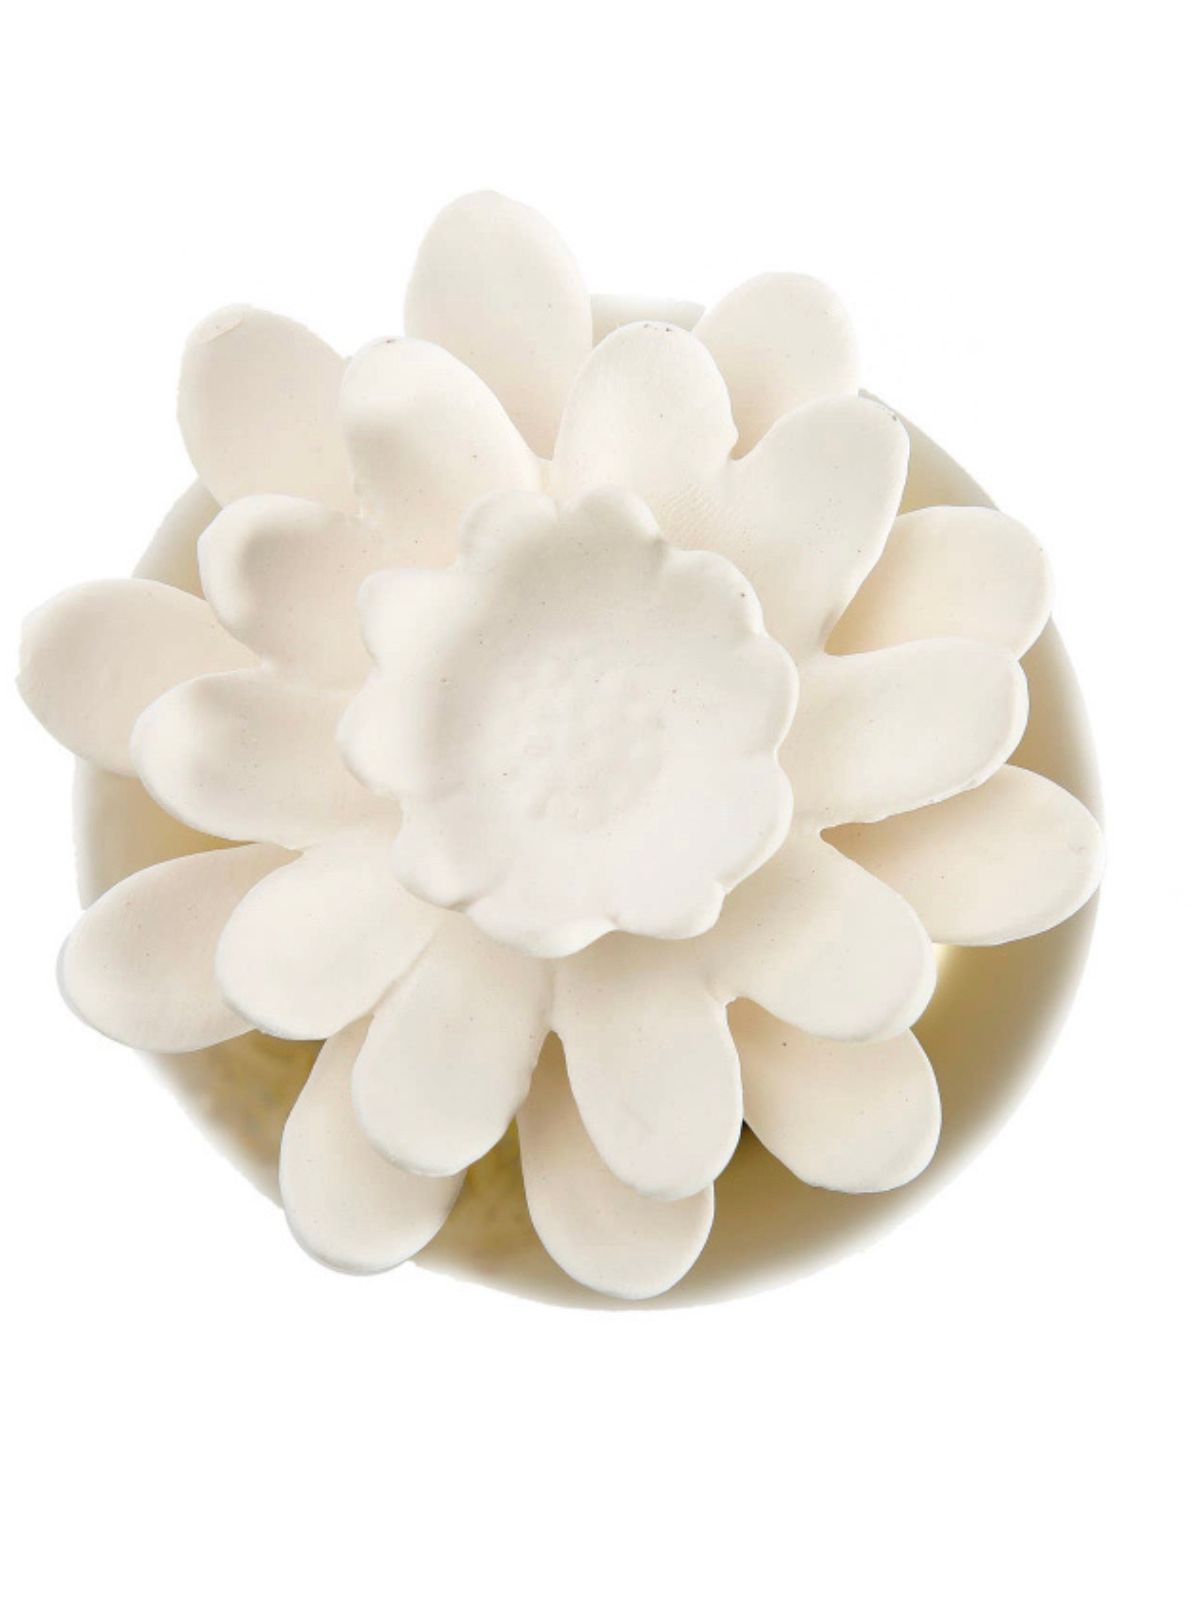 Polished Gold Oil Diffuser with White Floral Topper And Lily of the Valley Scent. Sold by KYA Home Decor. 